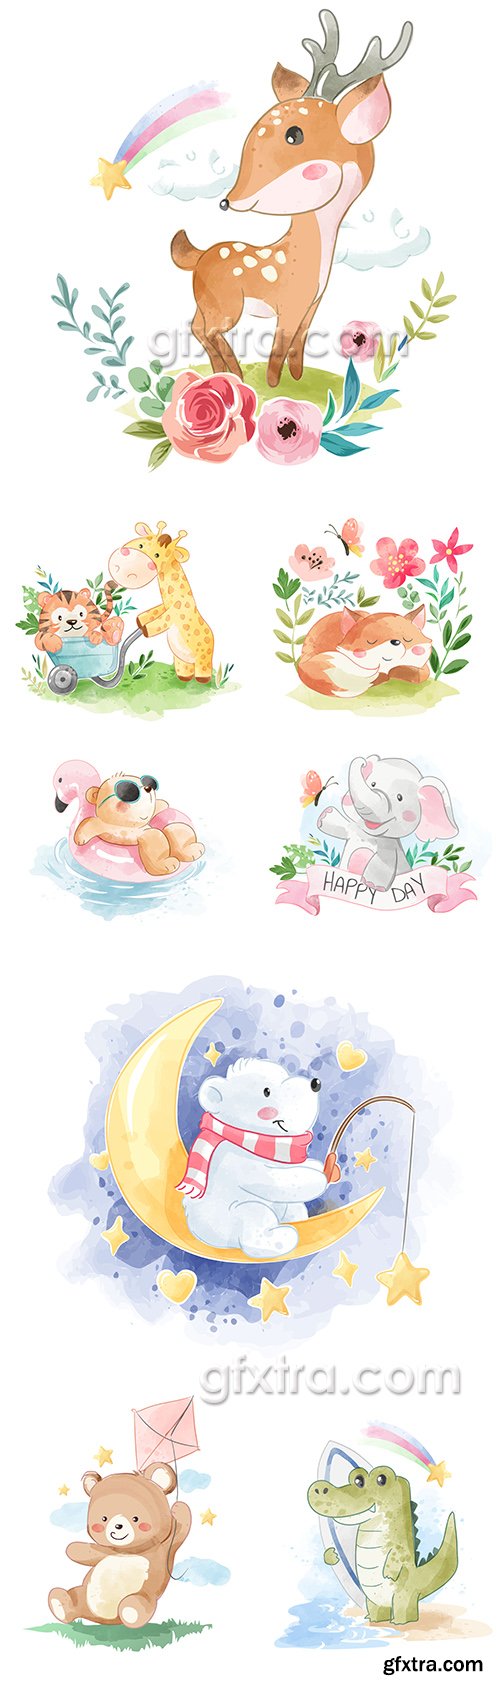 Funny animals decorative flowers watercolor illustrations 5